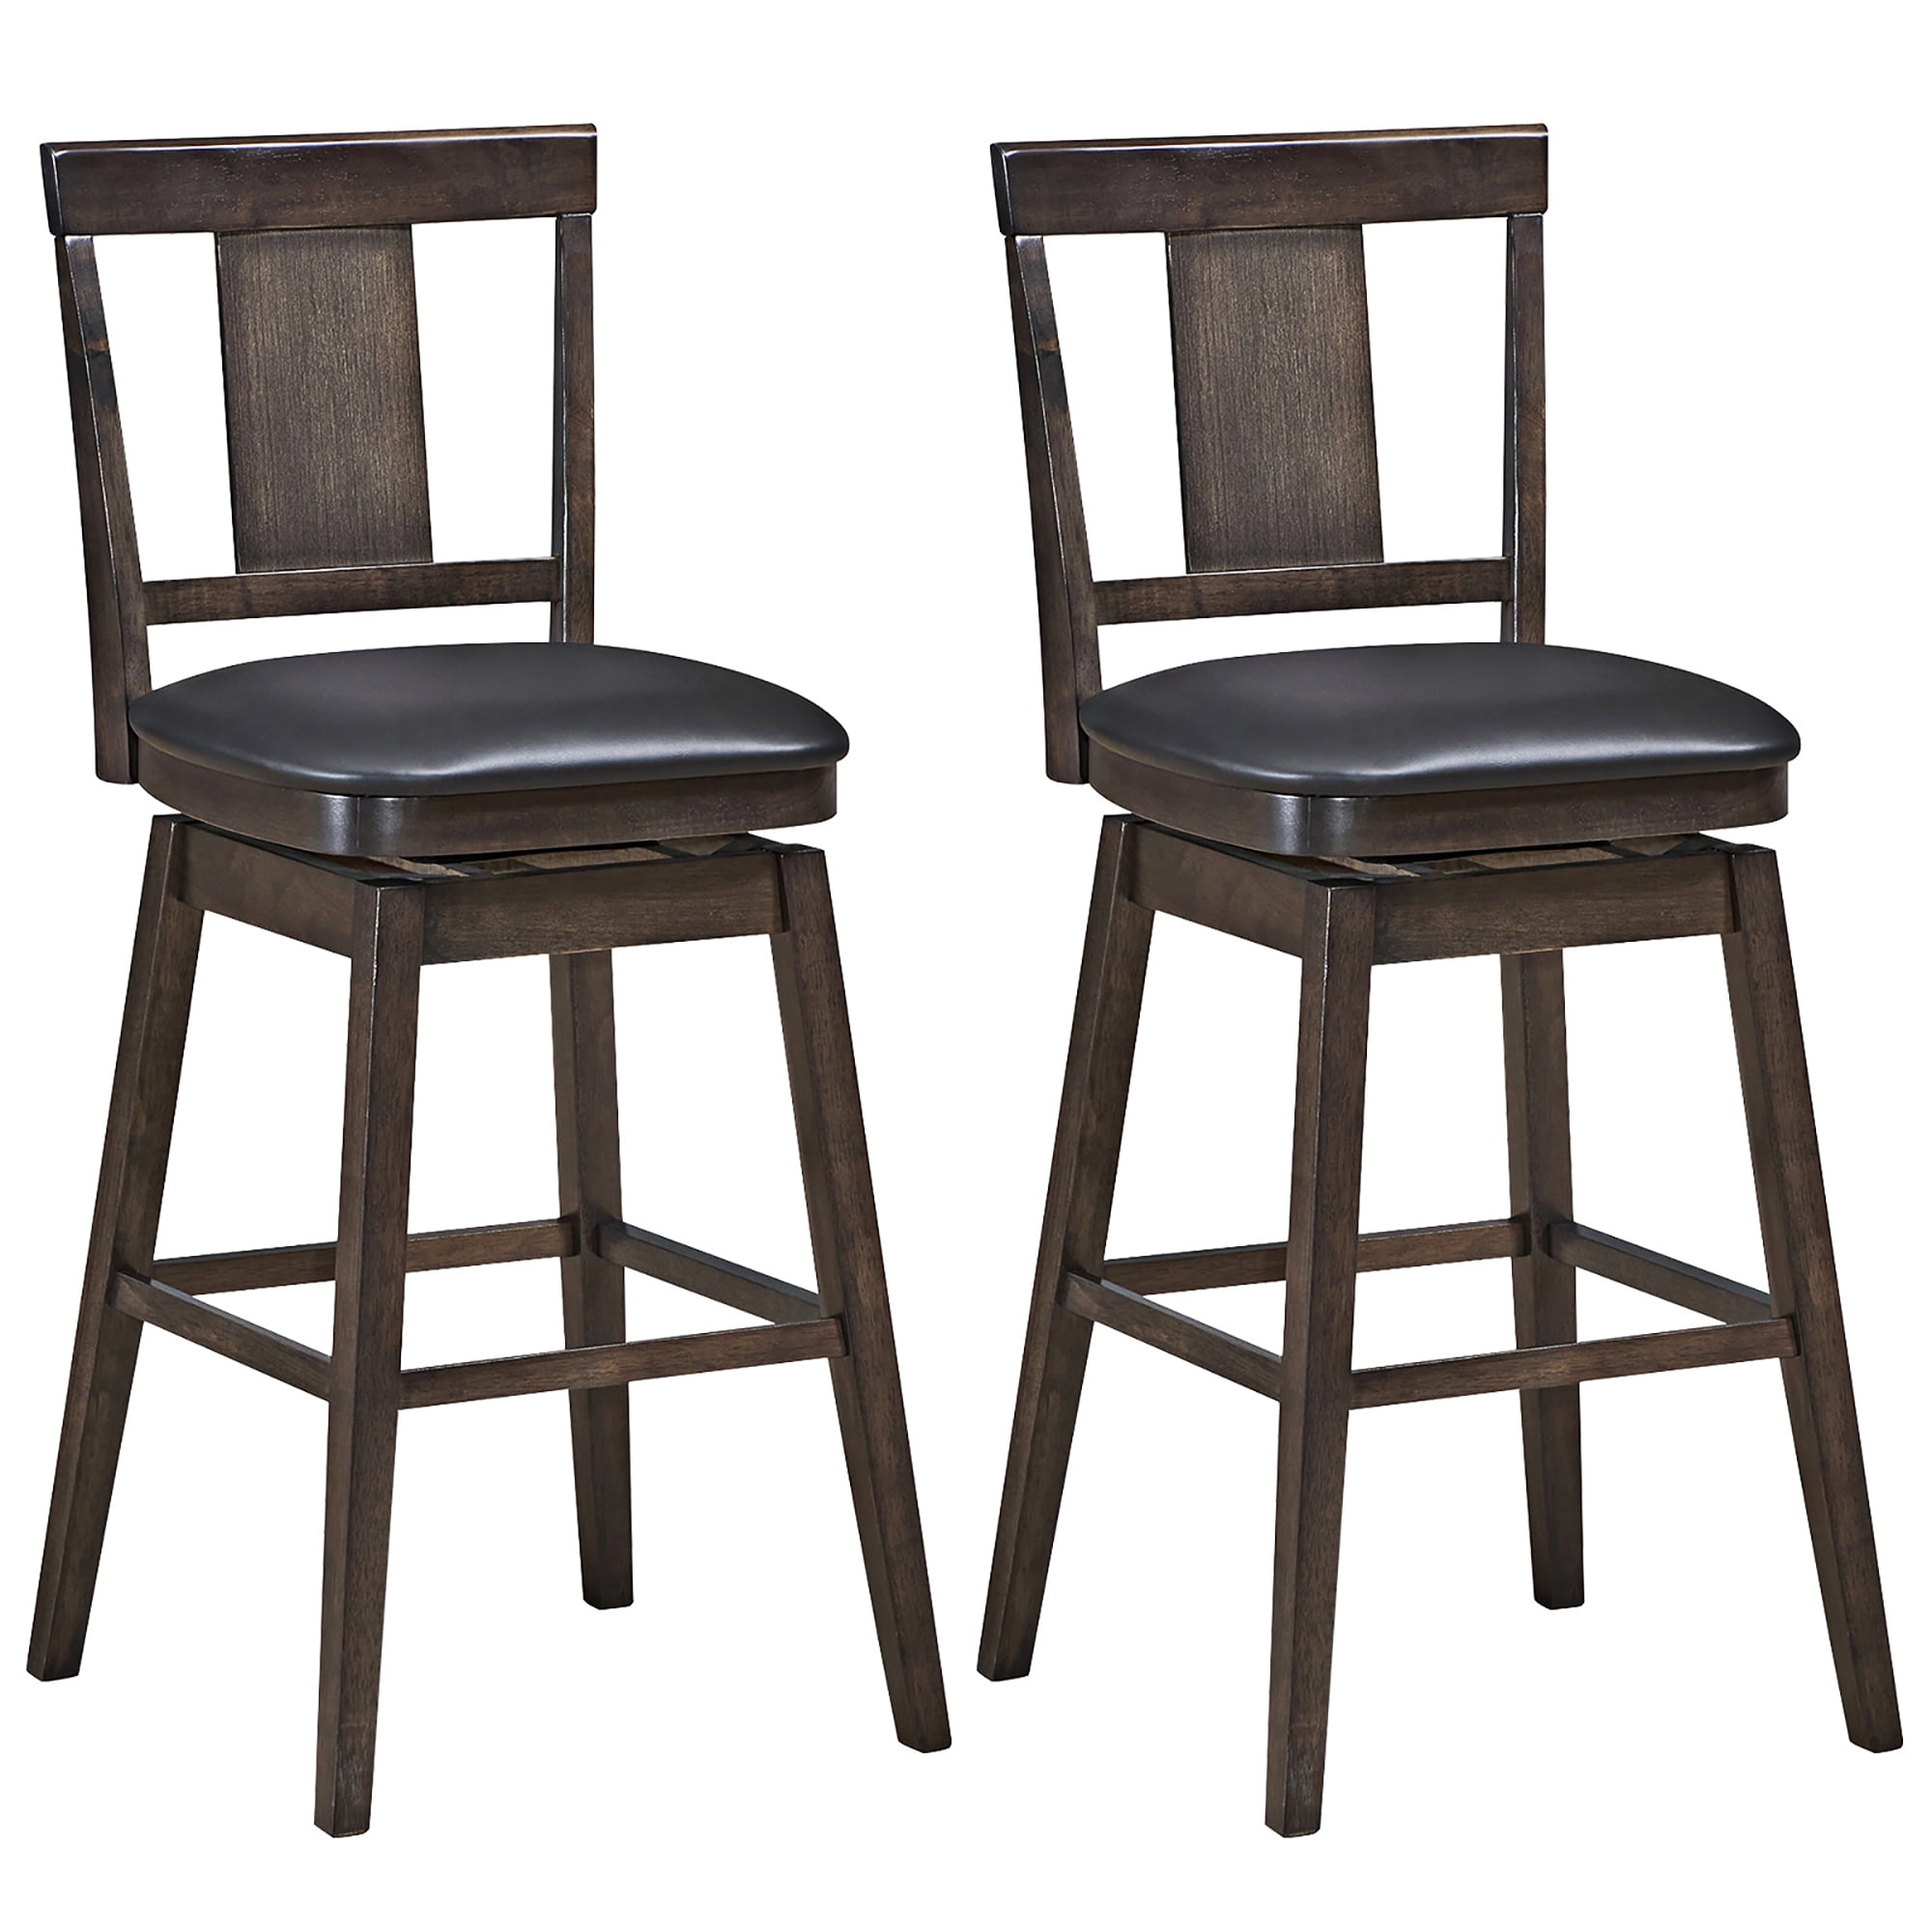 Set Of 2 Swivel Bar Stool 29 Inch, 29 Inch Bar Stools With Back